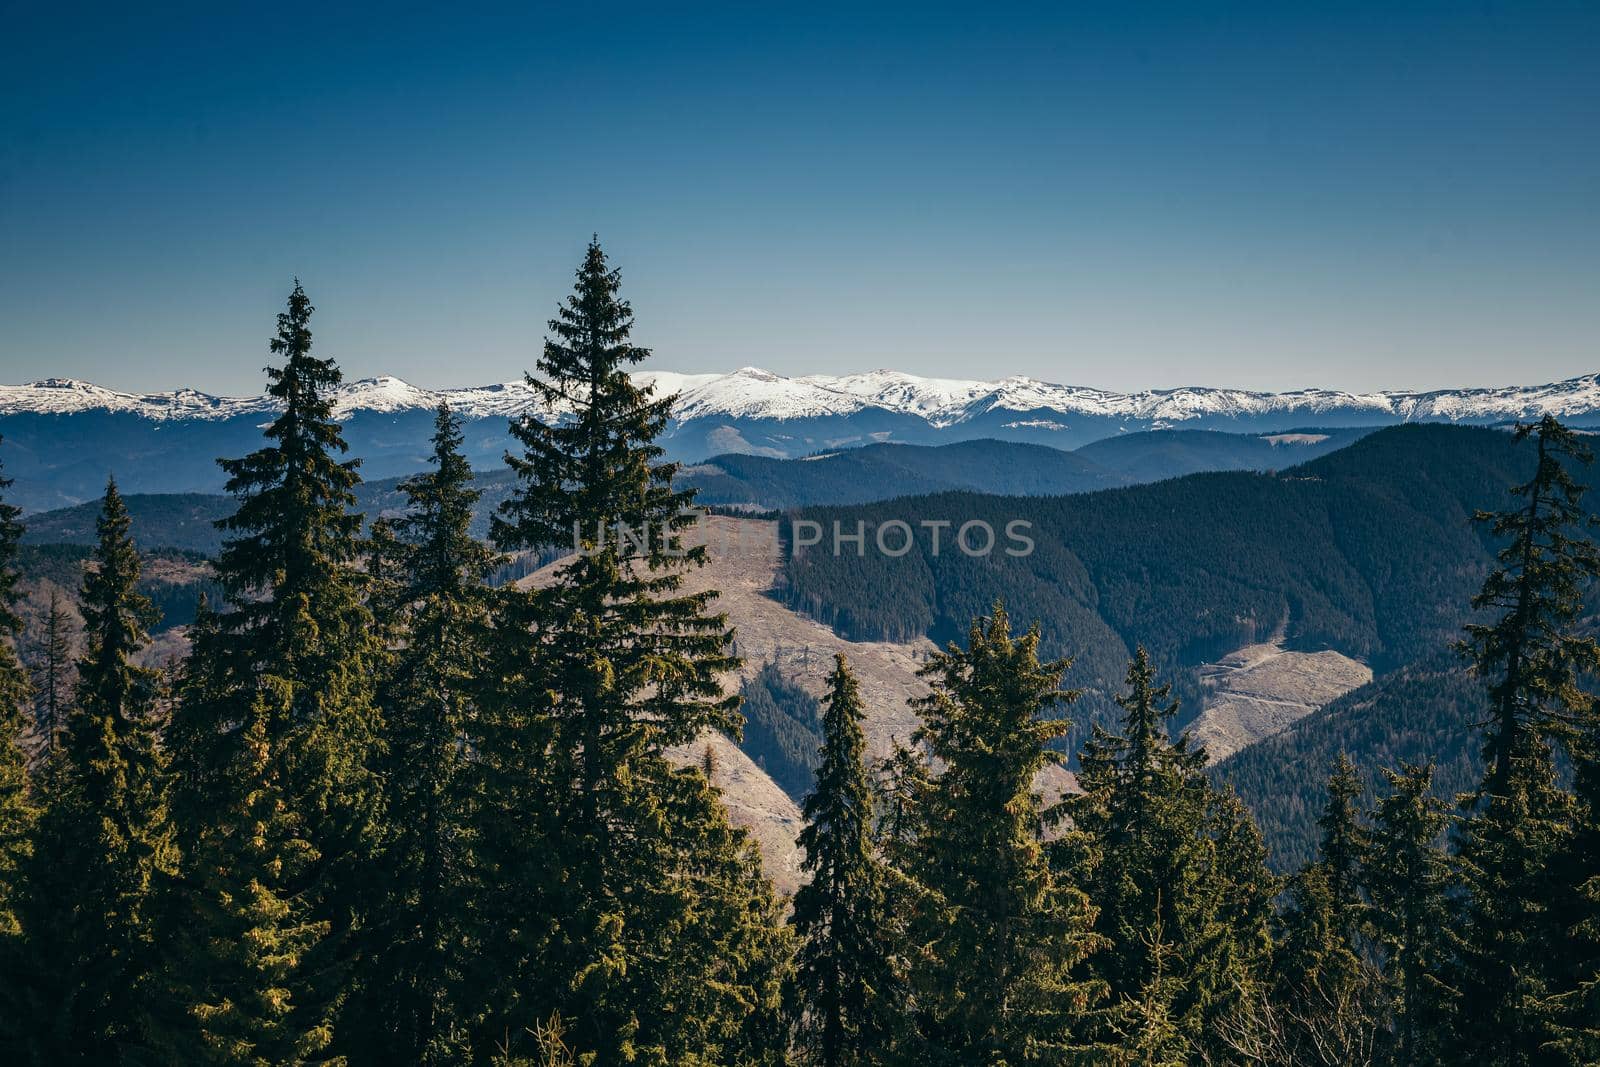 Snowy mountains, coniferous deforestation, a spring, a winter by Dmytro125